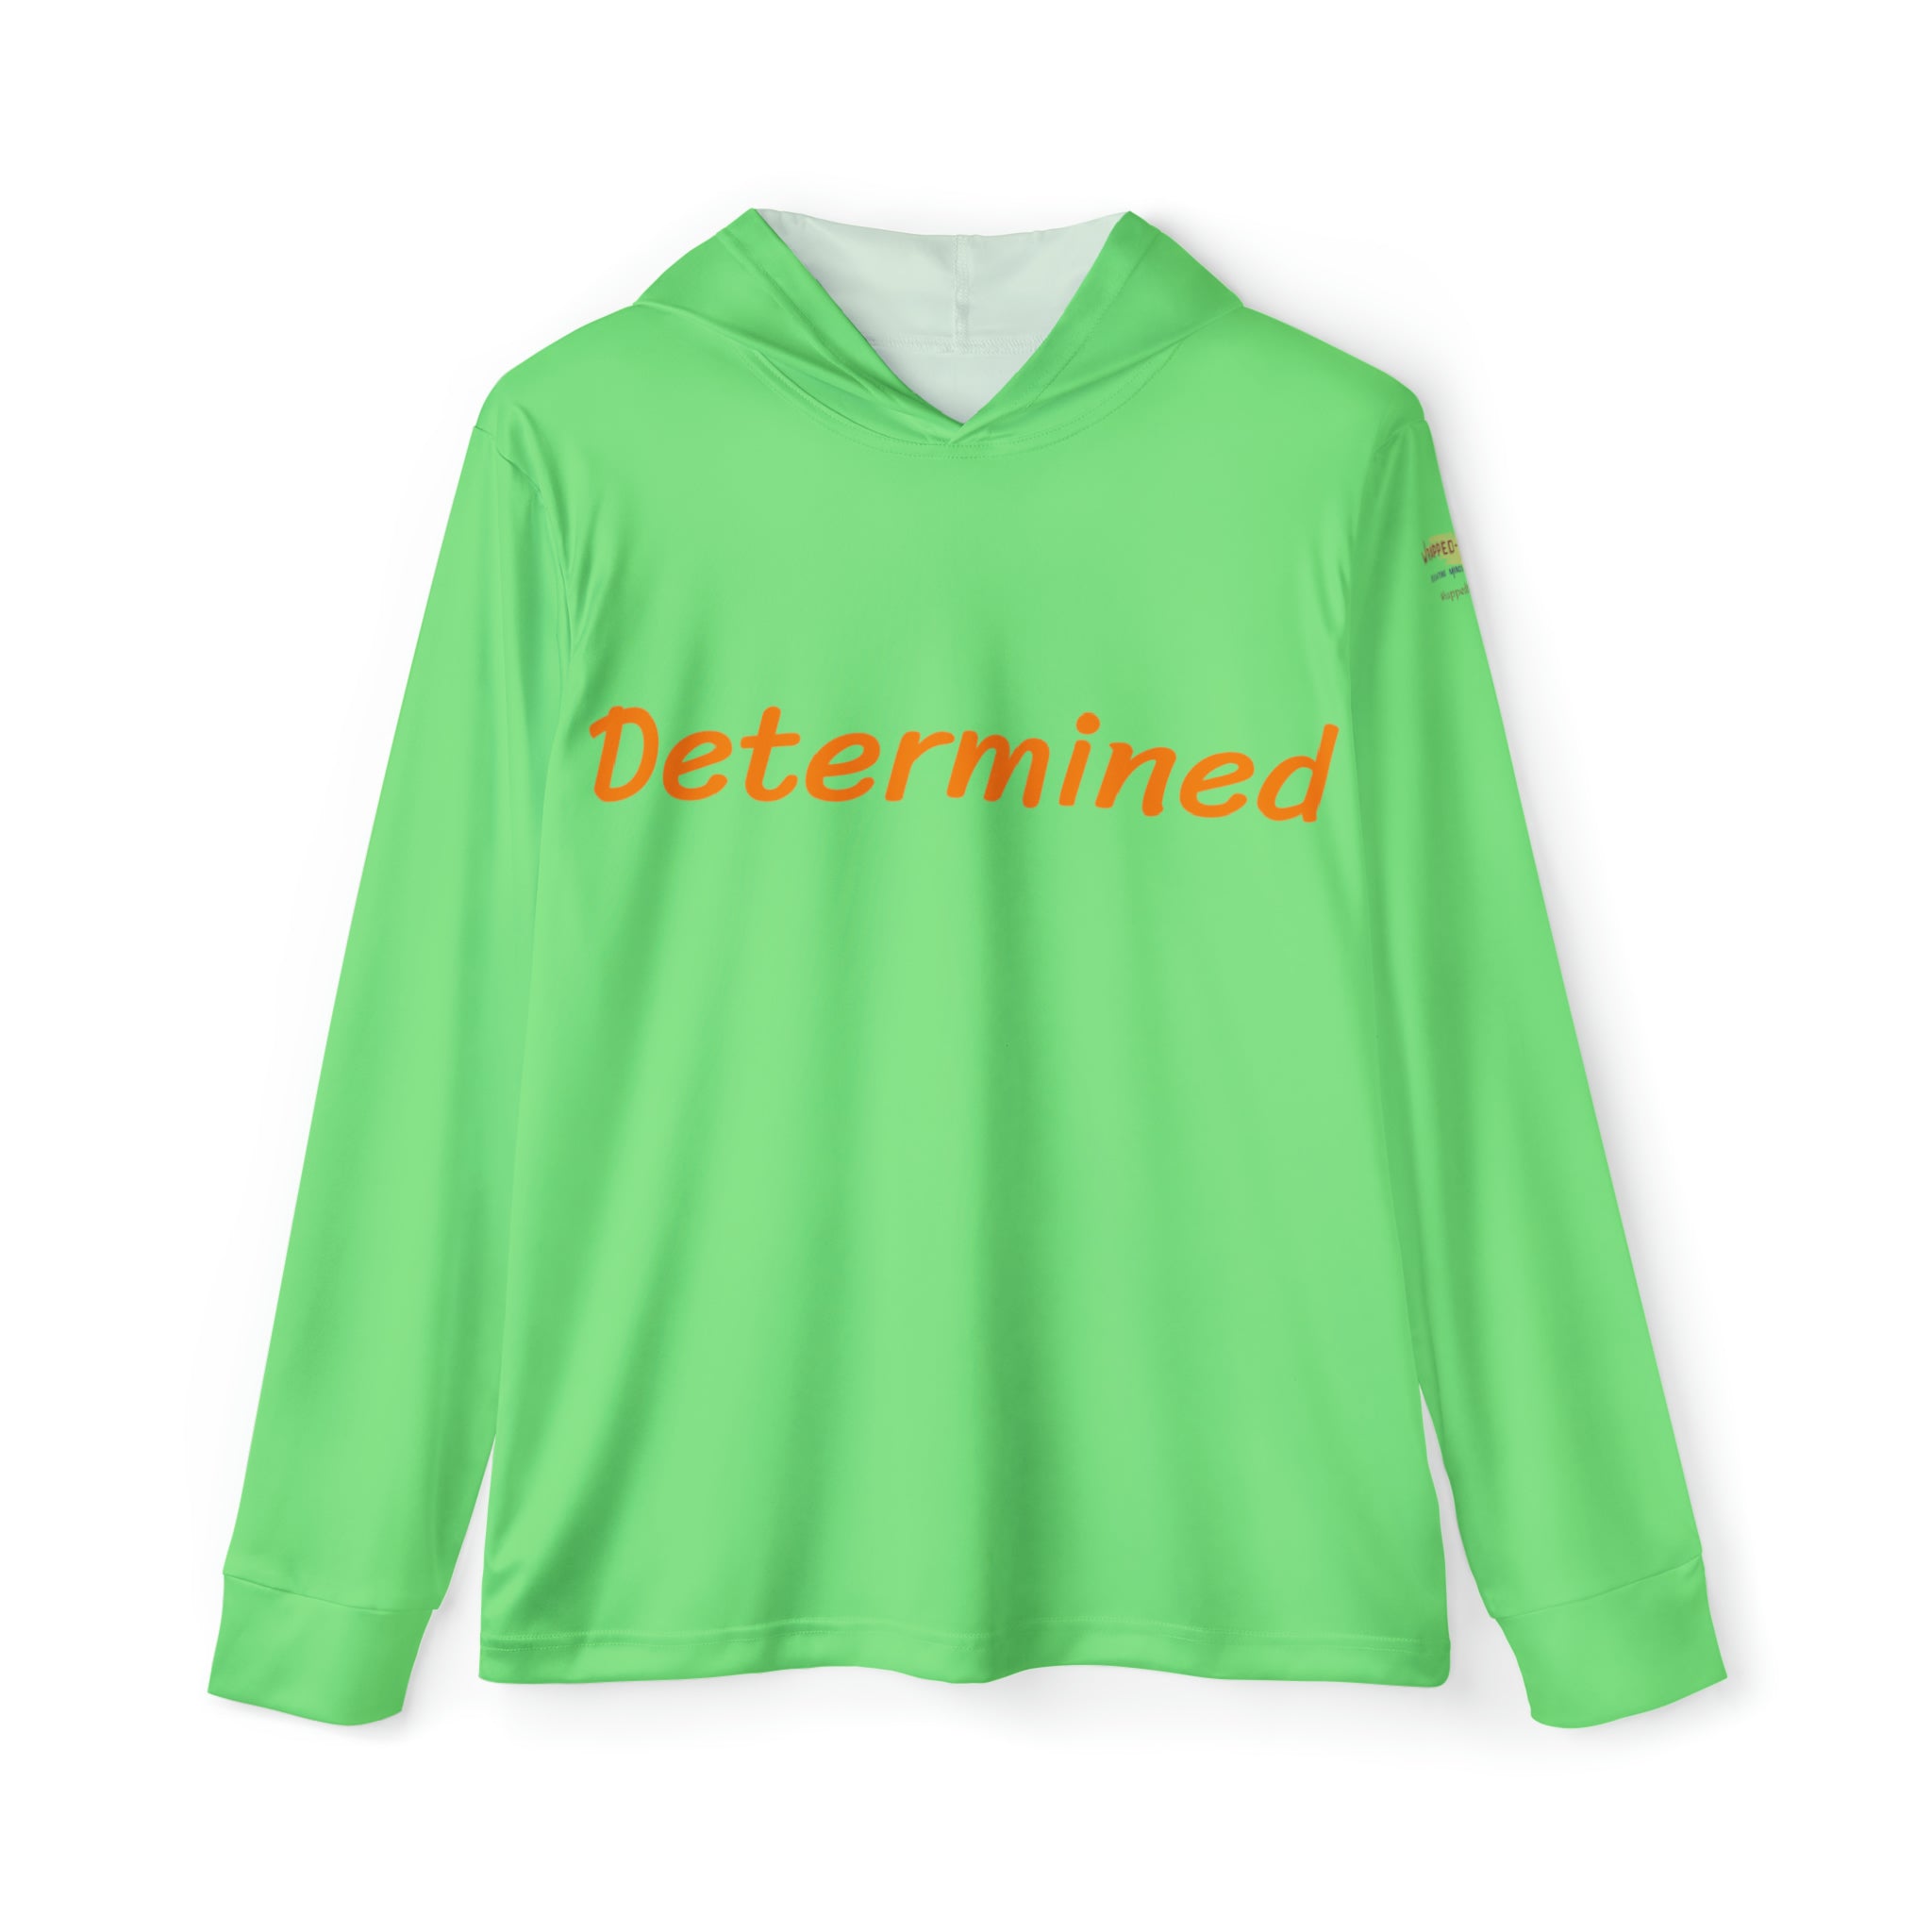 Determined Men's Warmup Hoodie Achieve Your Goals Activewear Durable Fabric Made in USA Men's Hoodie Mental Health Support Moisture-wicking Performance Apparel Quality Control Sports Warmup UPF 50+ All Over Prints 12186047376703440051_2048 Printify